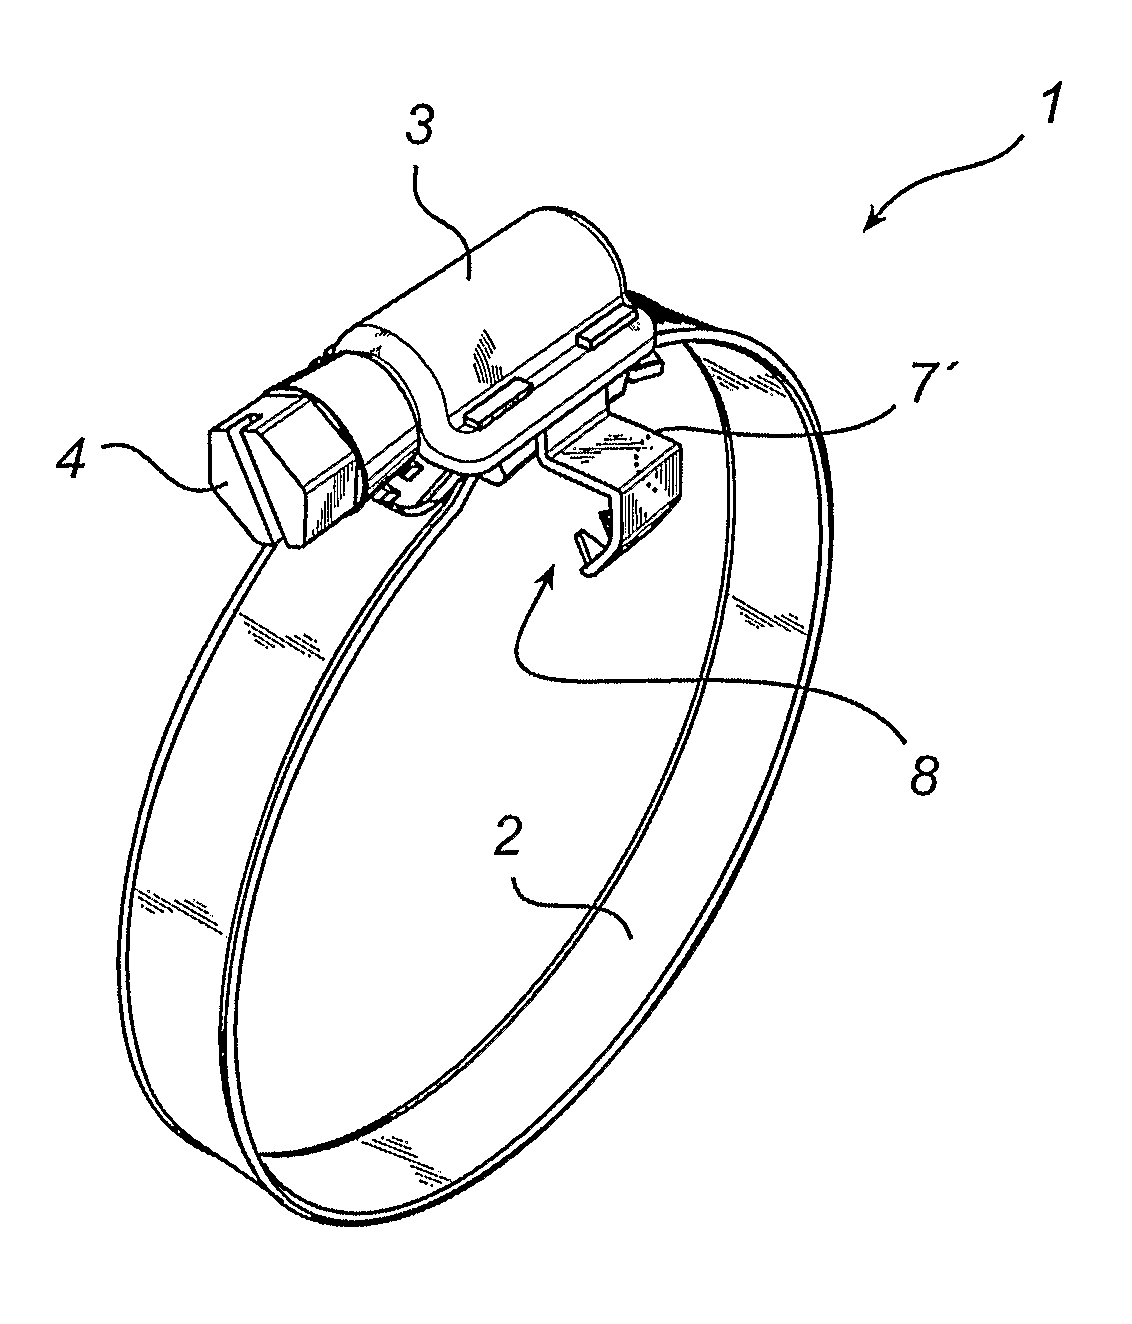 Fixing device for hose clamp